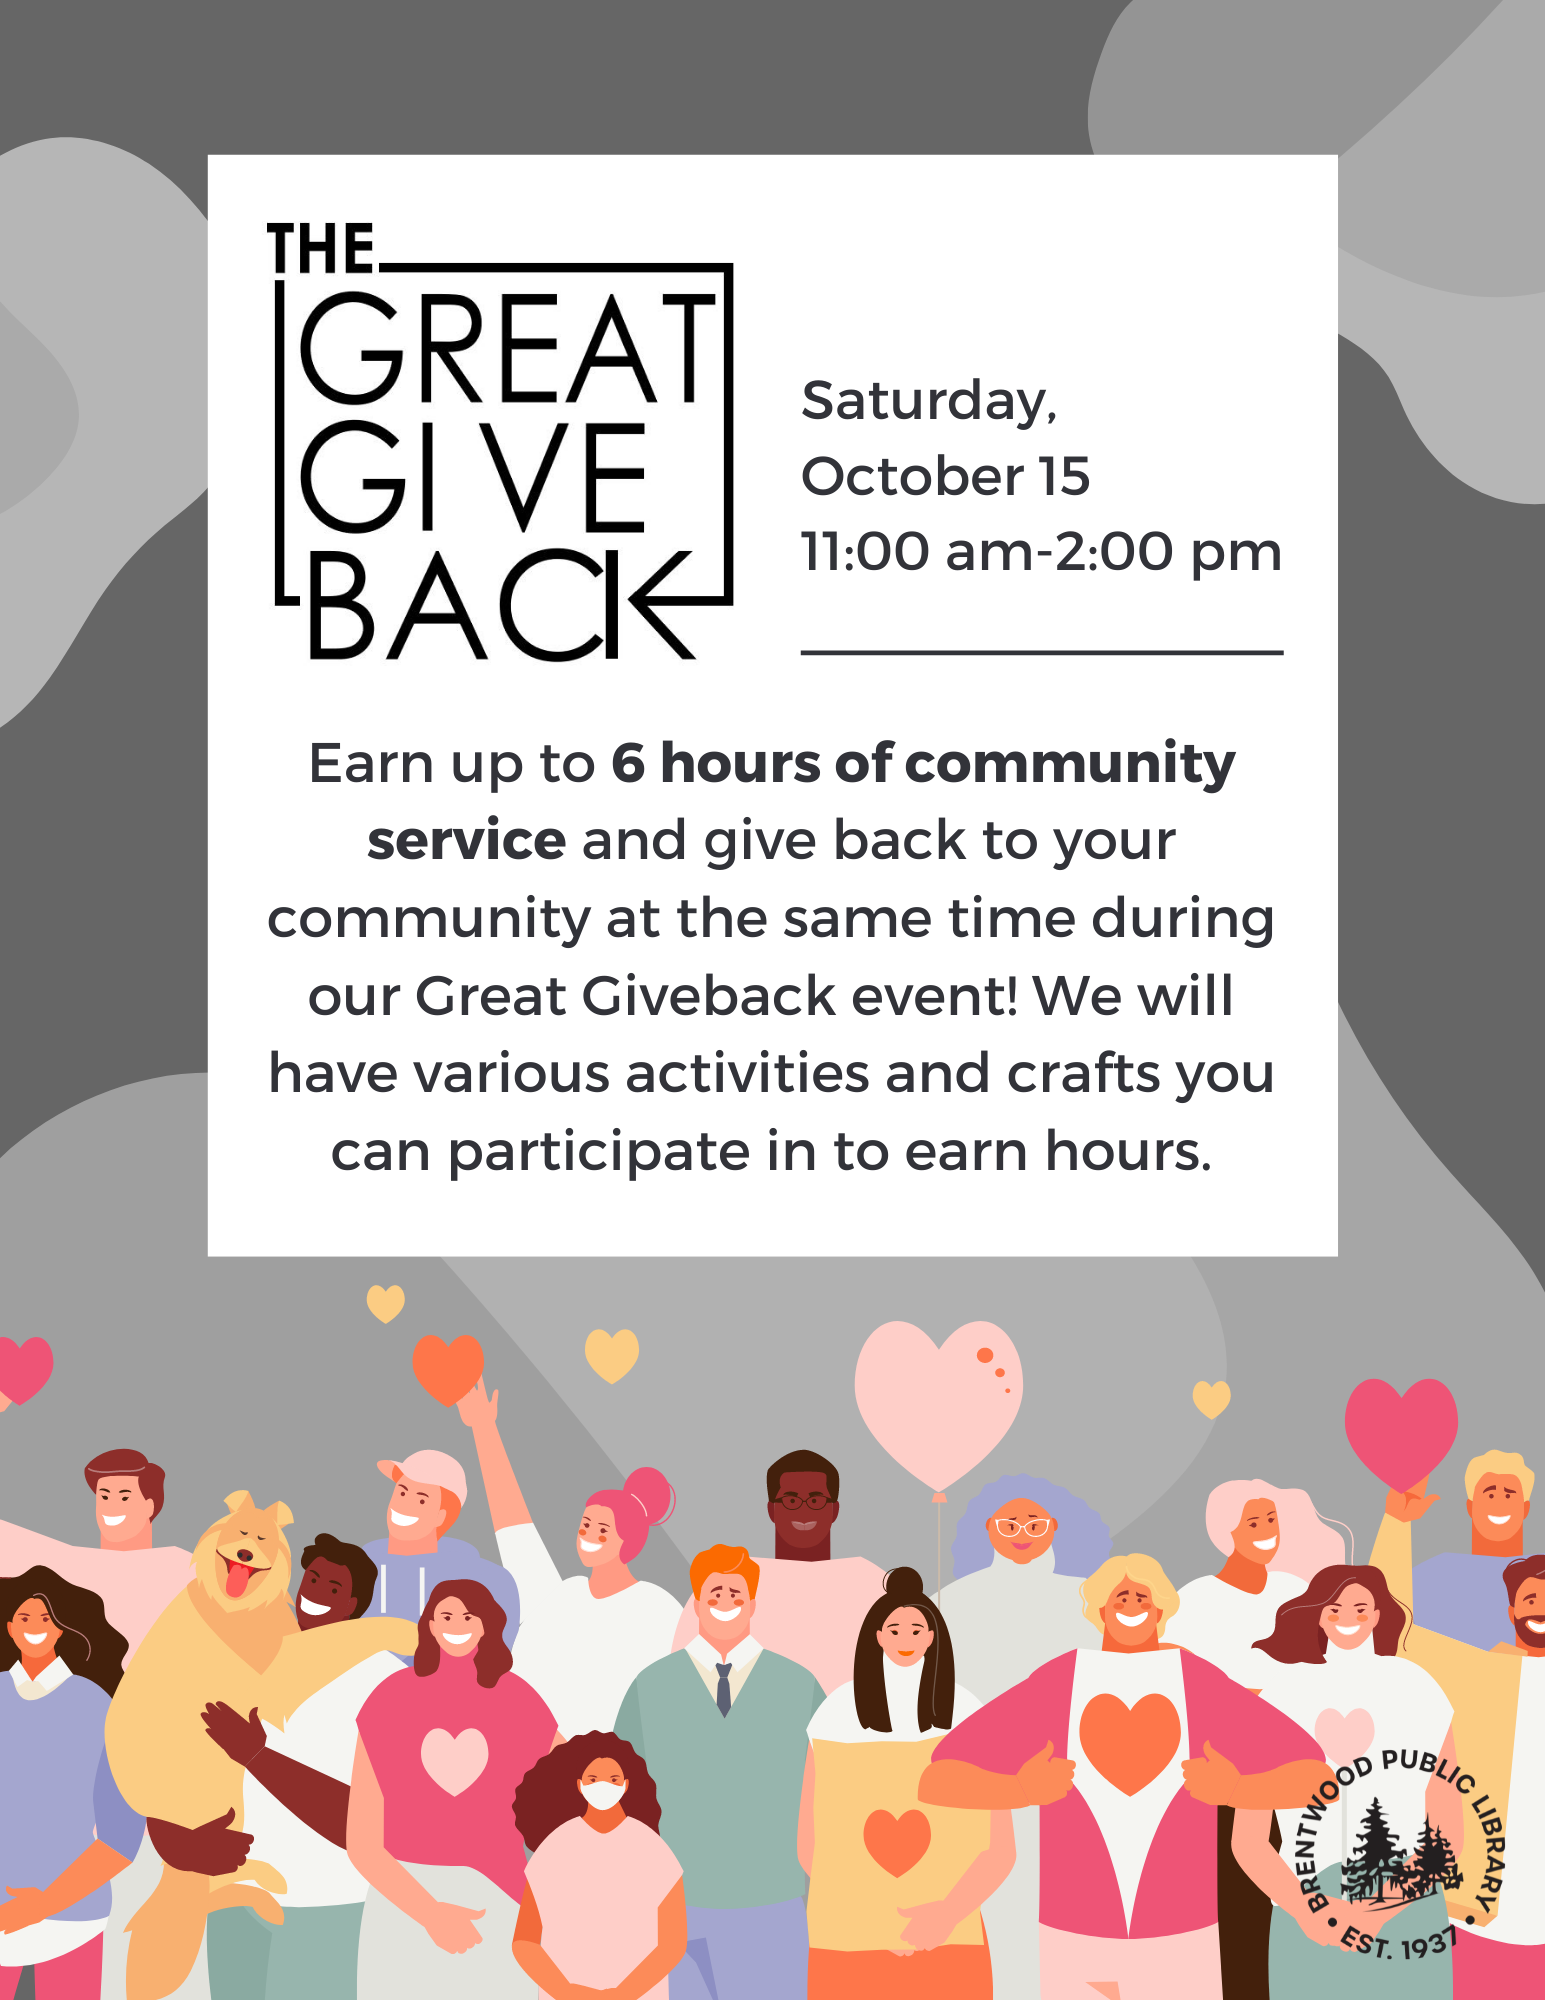 The Great Giveback